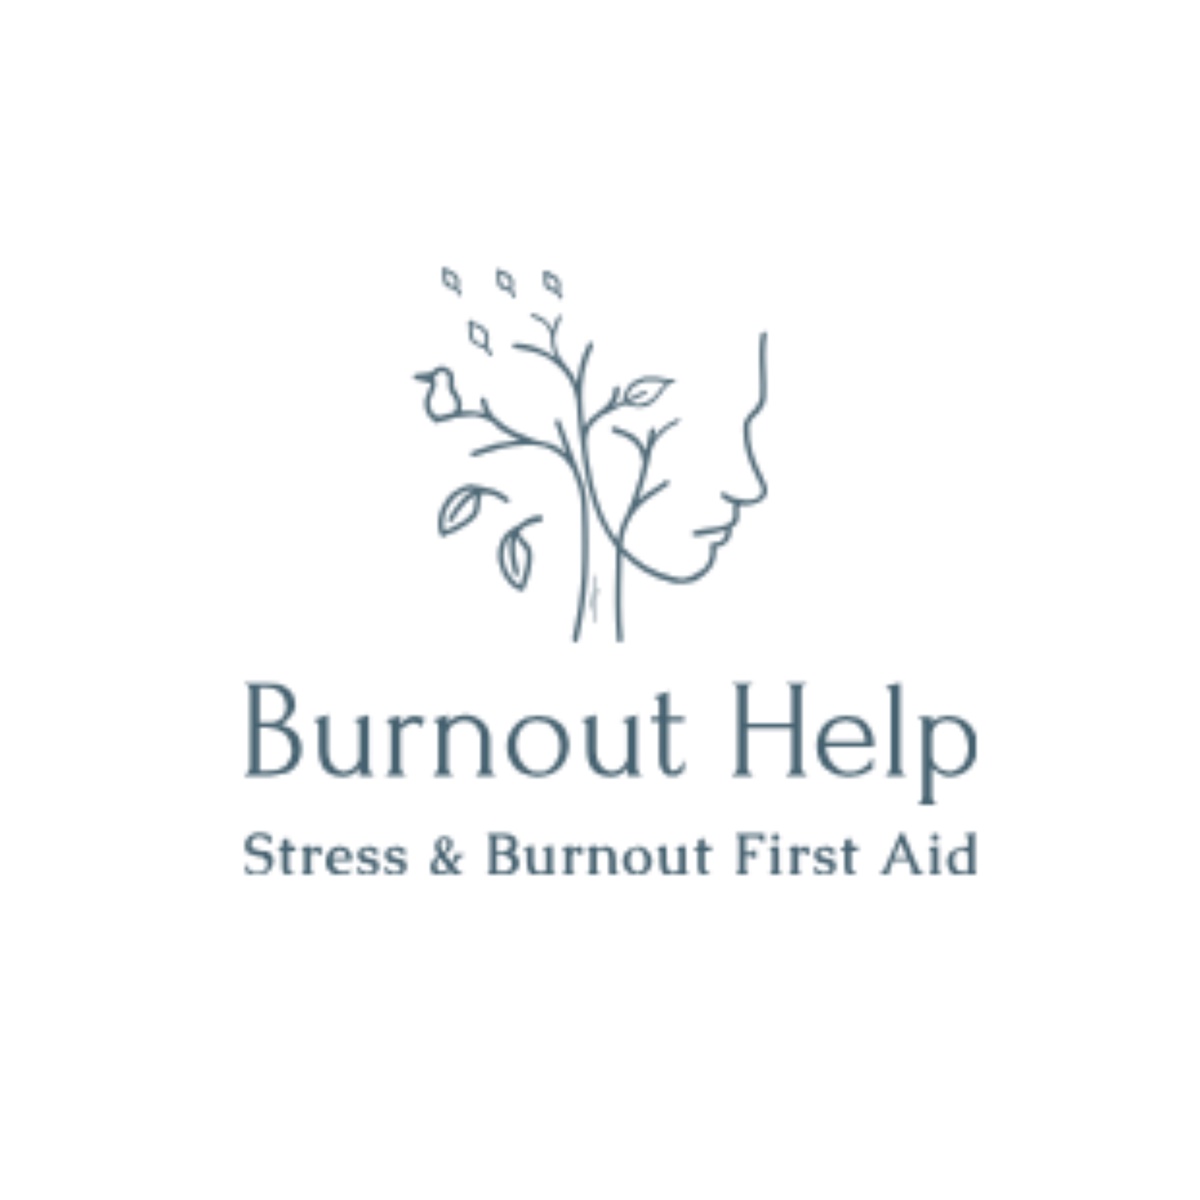 Burnout Recovery Help, Burnout Prävention, and Burnout Help: Your Path to Wellness